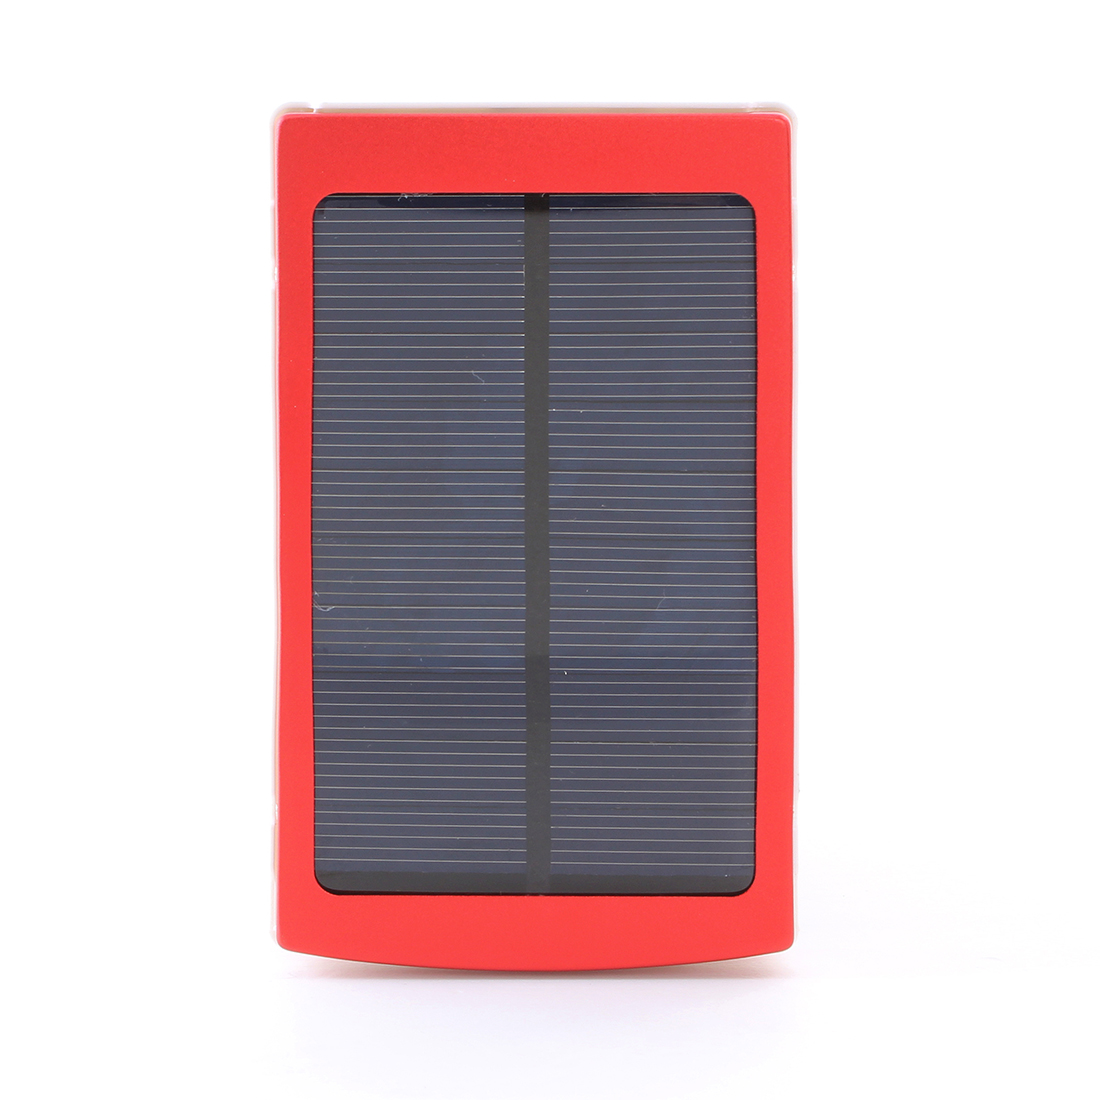 Solar-Charger-Mobile-Phone-Cell-Phone-Power-Bank-Charger-for-Camping-Hiking-Travel-955194-7